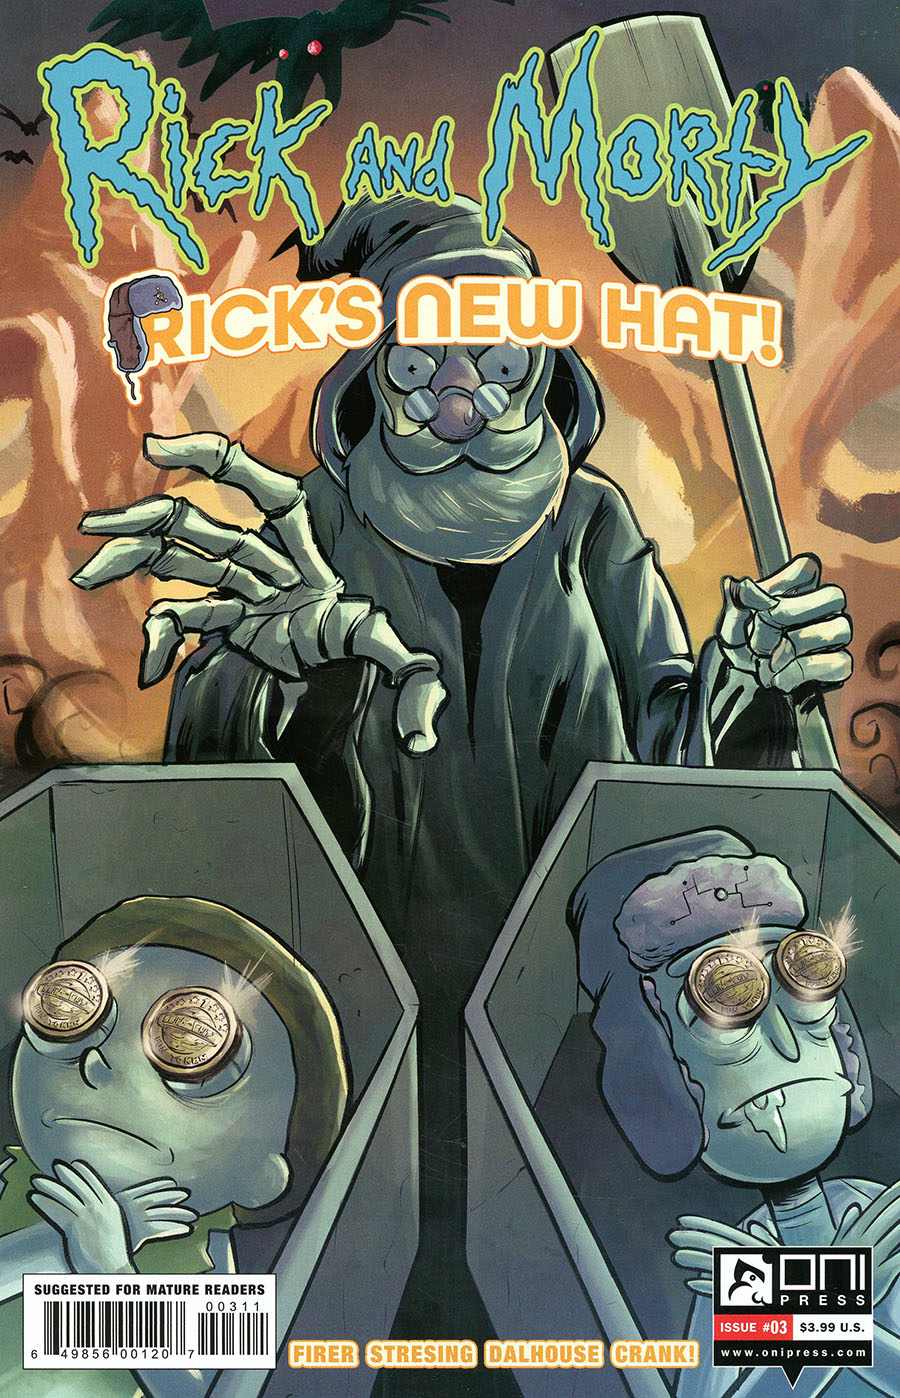 Rick And Morty Ricks New Hat #3 Cover A Regular Fred C Stresing Cover